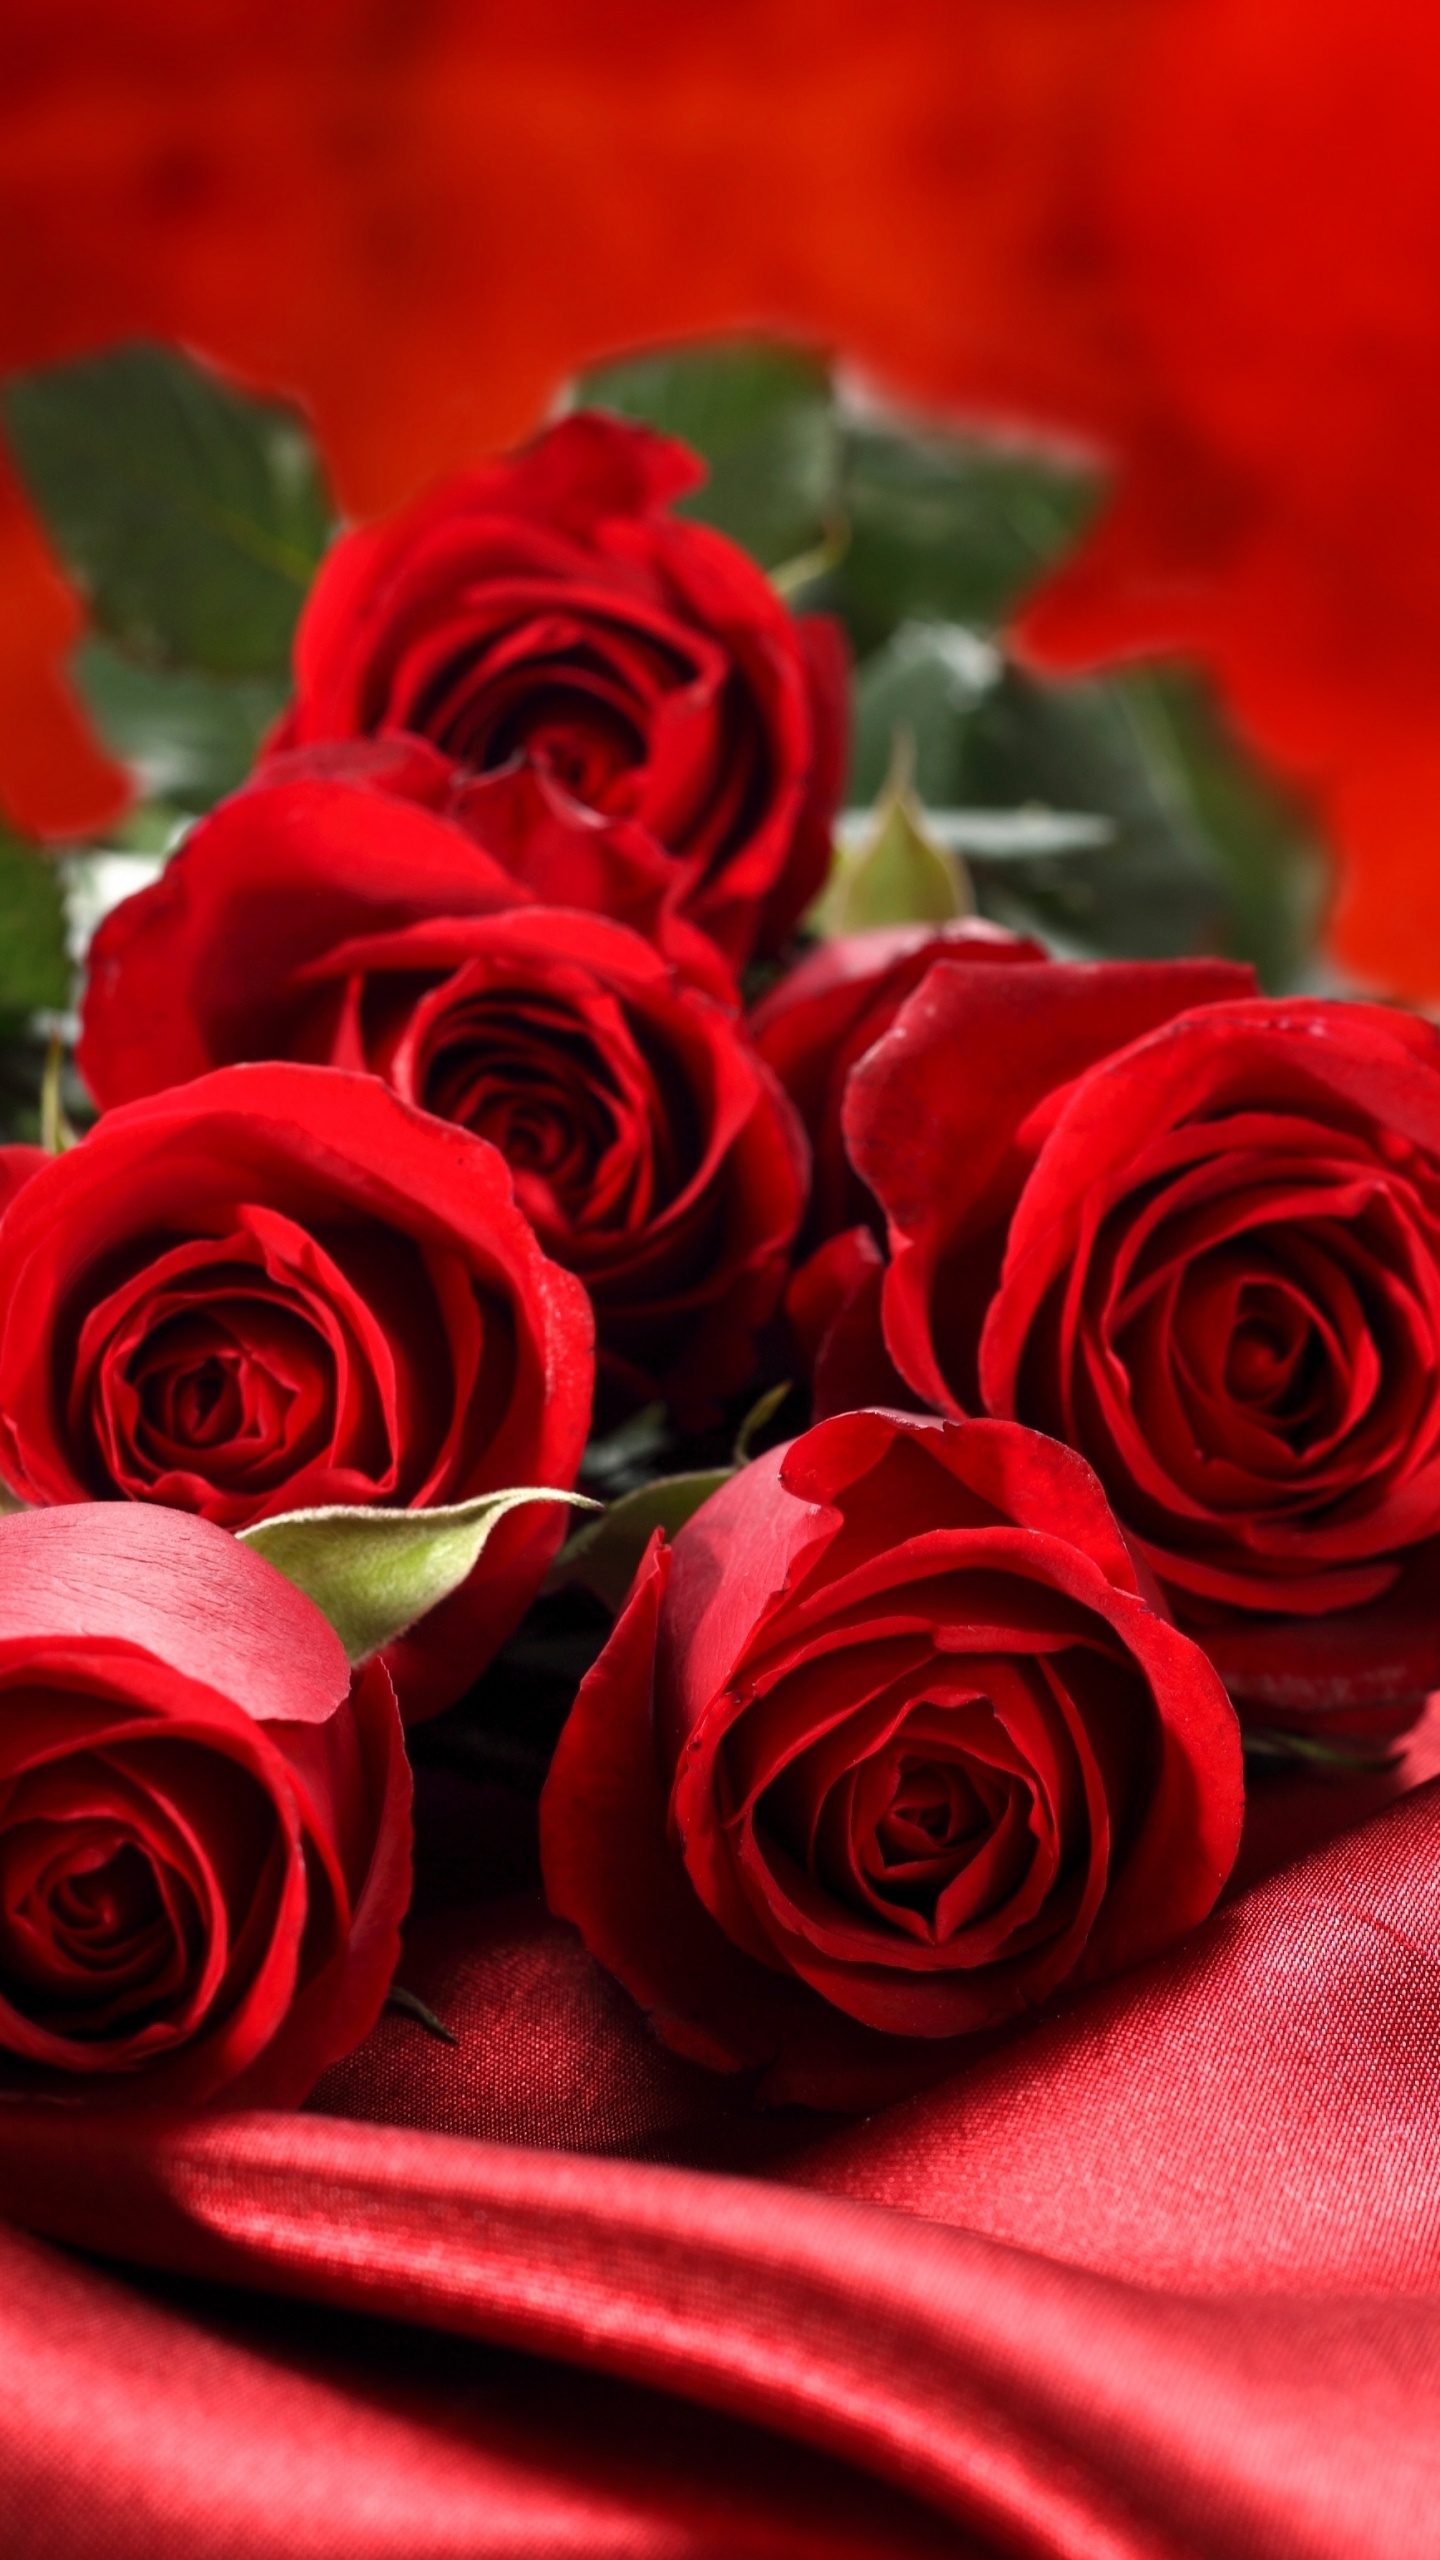 Red Roses on Red Textile. Wallpaper in 1440x2560 Resolution